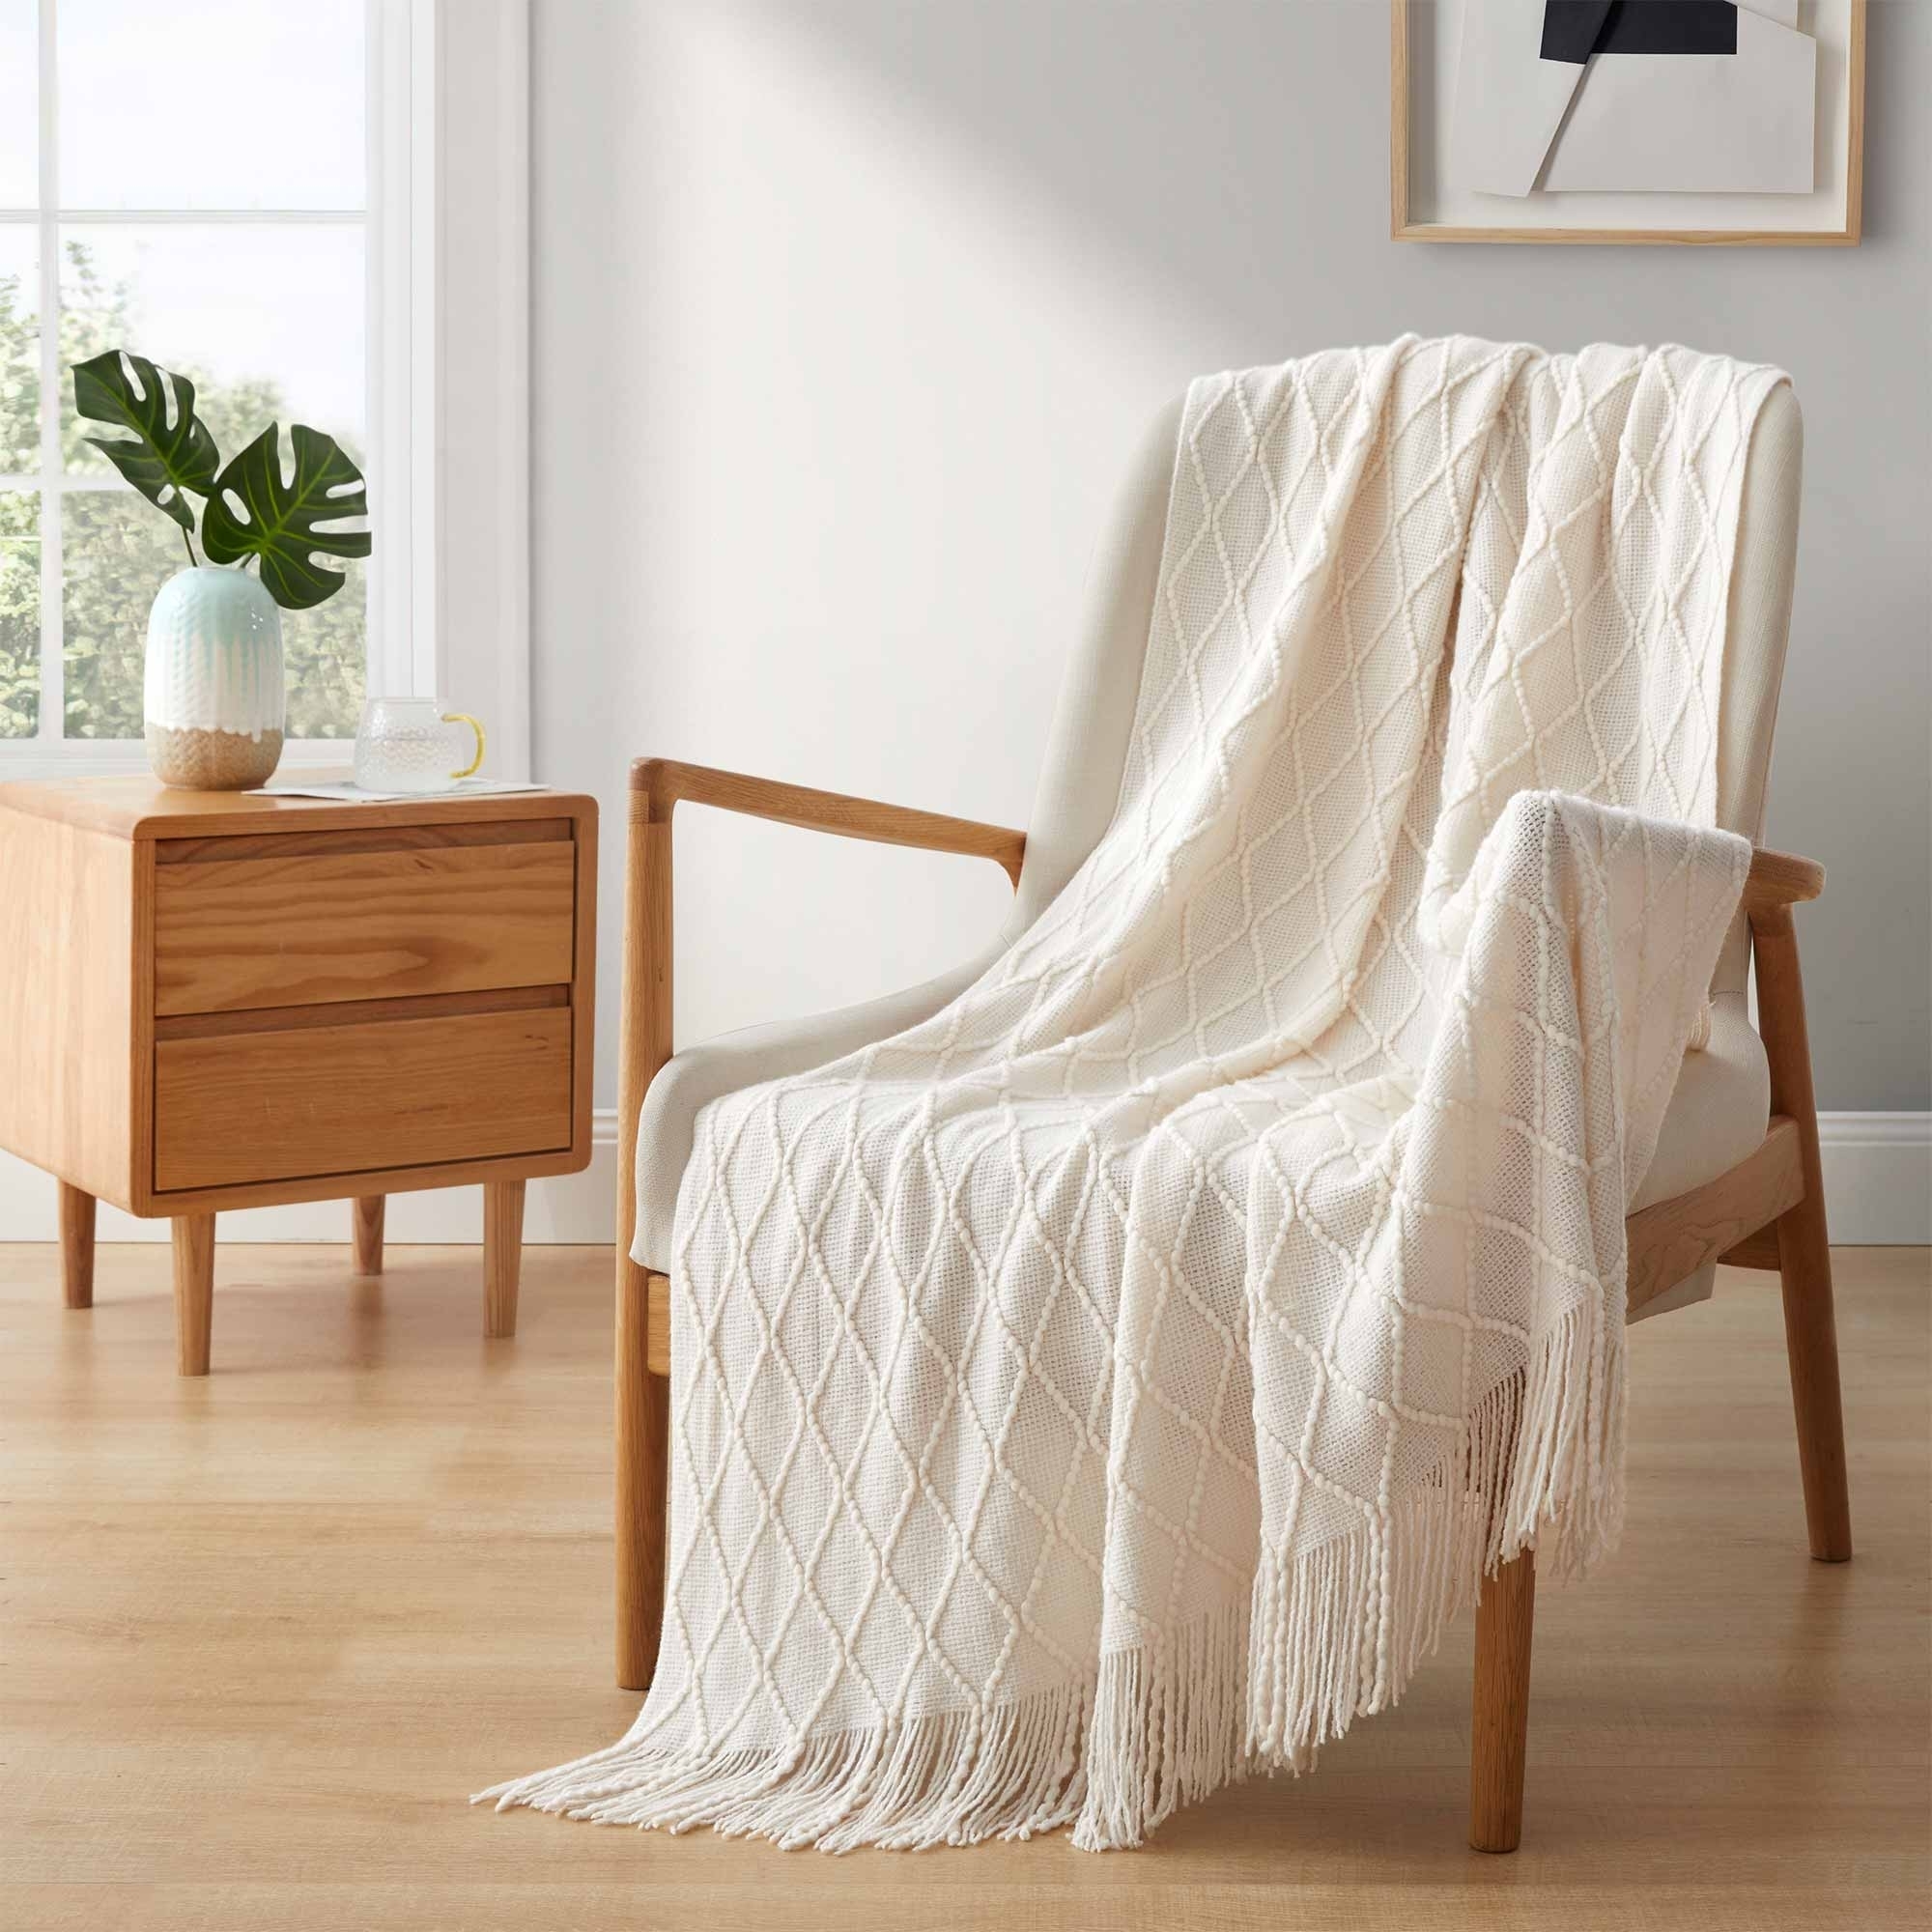 Ultra Soft Diamond Knit Throw Blanket 50x60-Perfect For Year-round Comfort - Cream, 50 In X 60 In